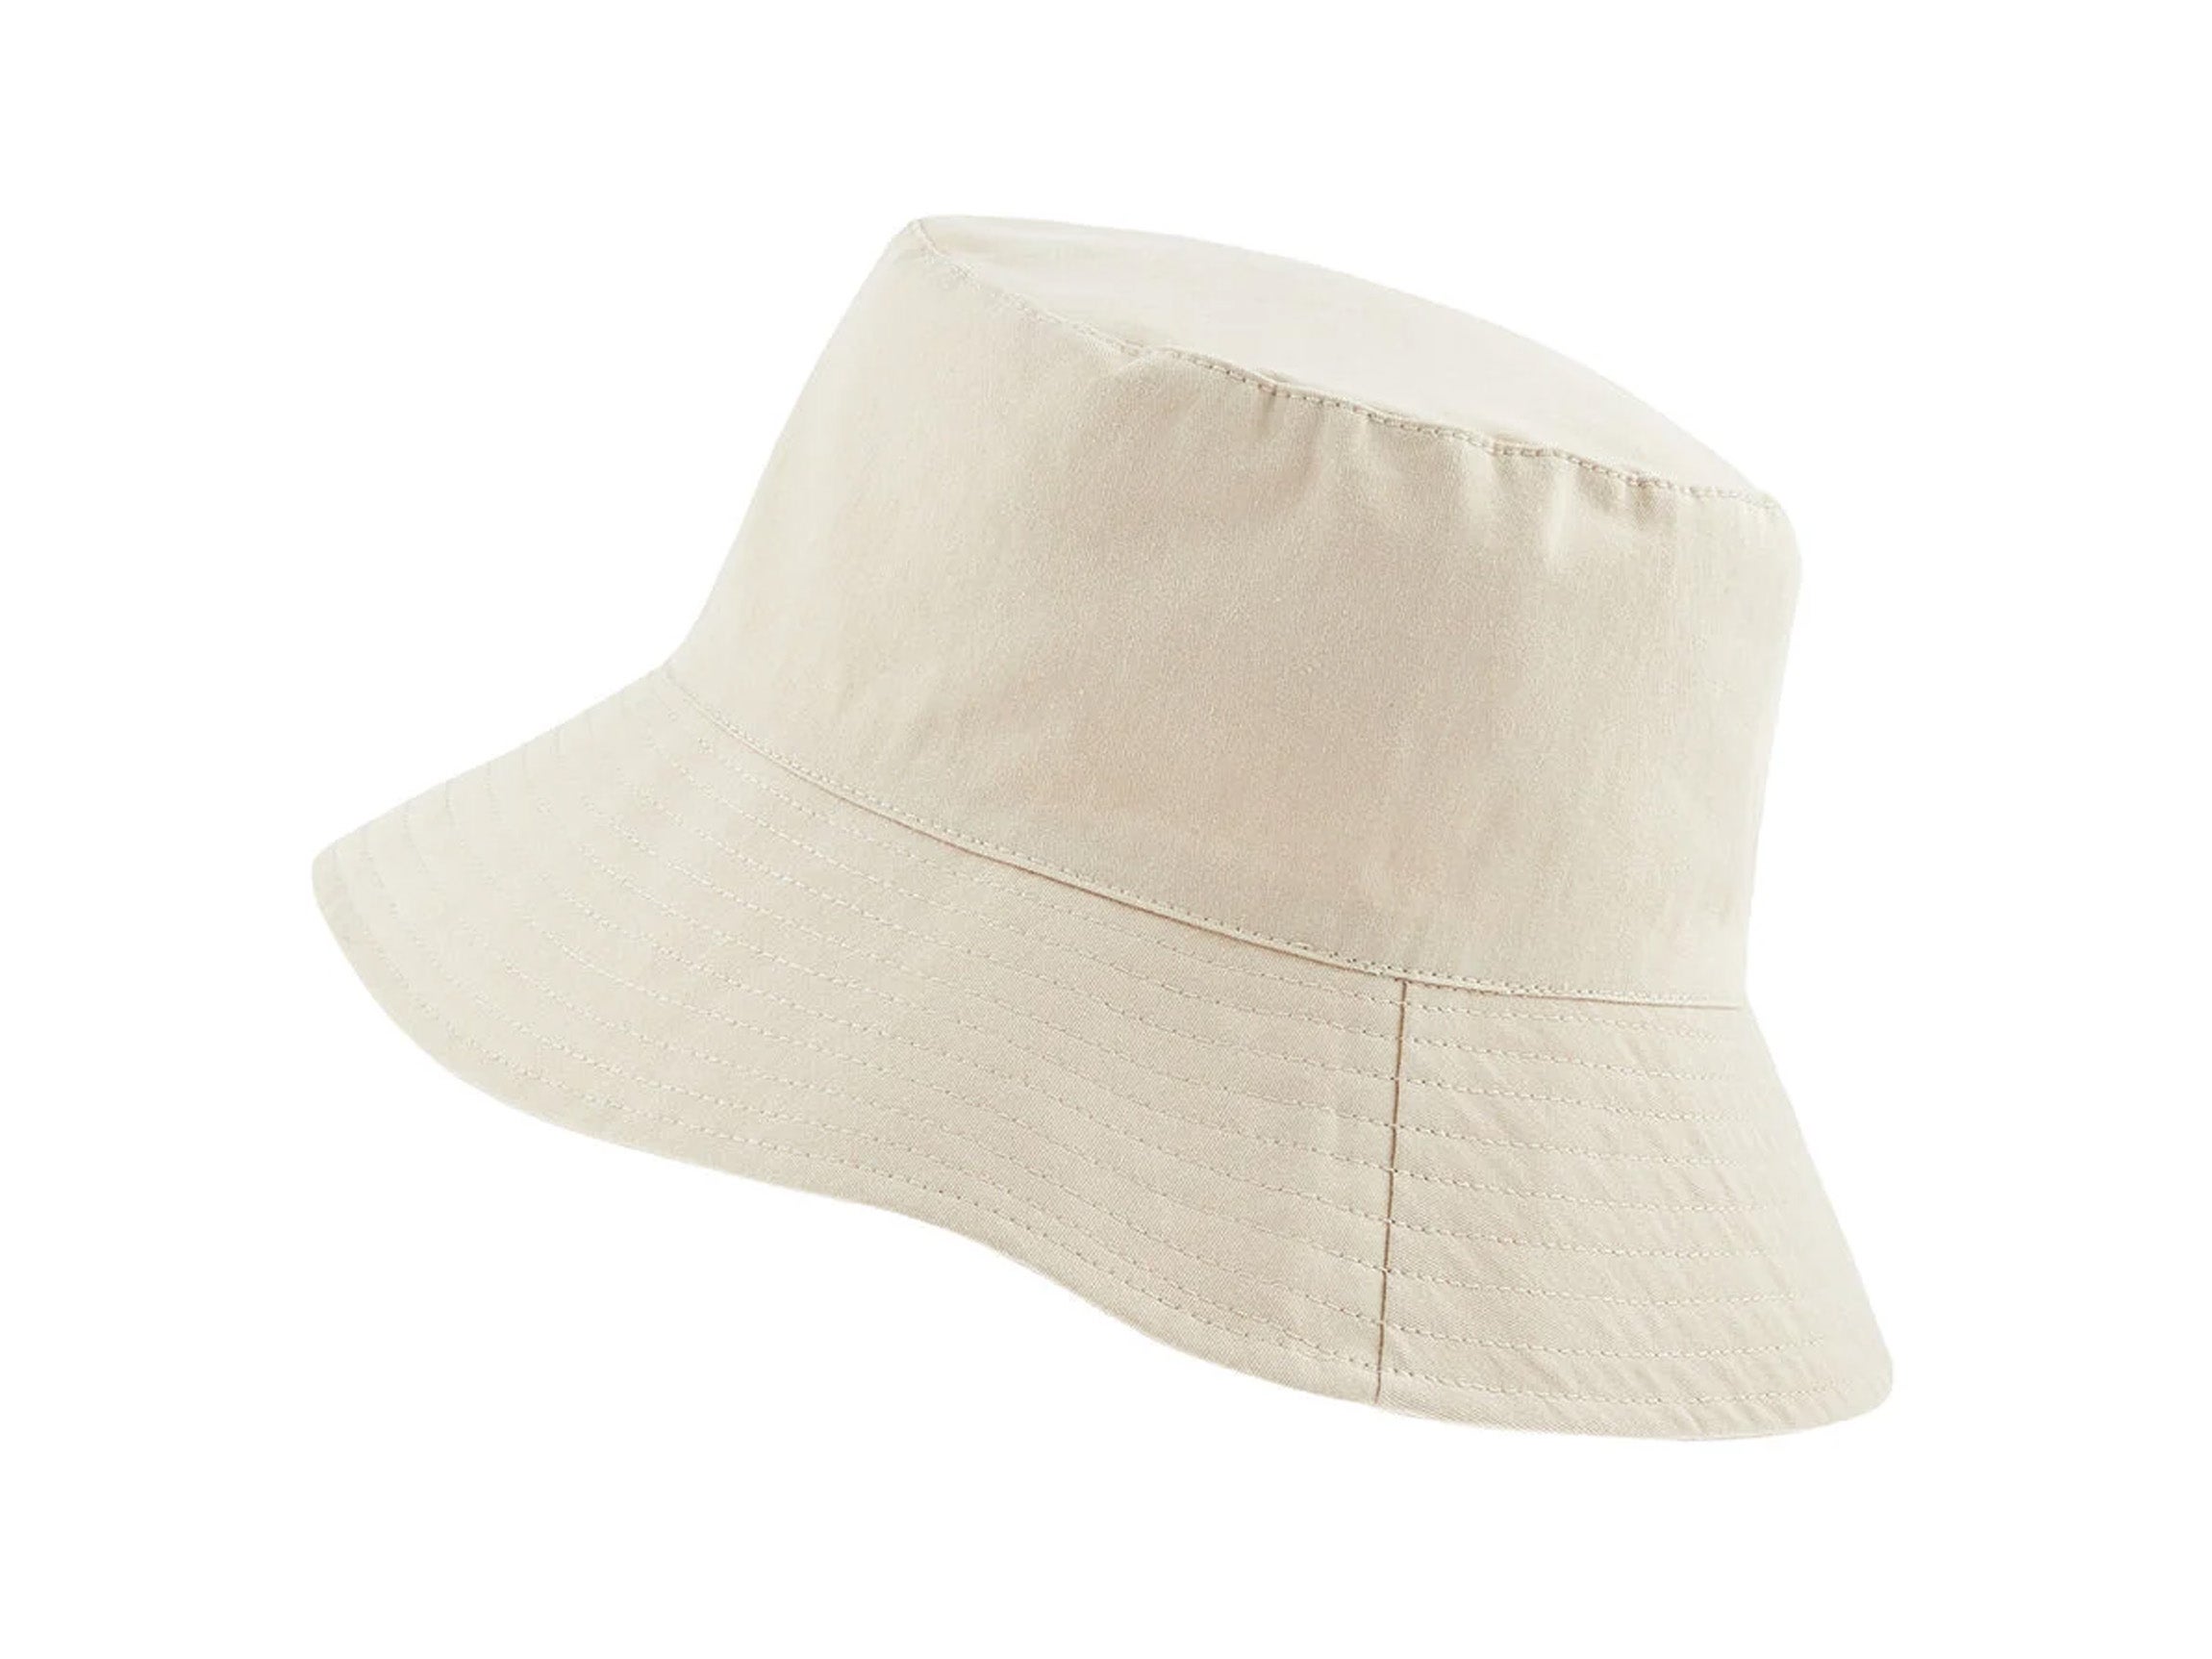 Best summer hats for women 2021: Cute sun hats to protect your 